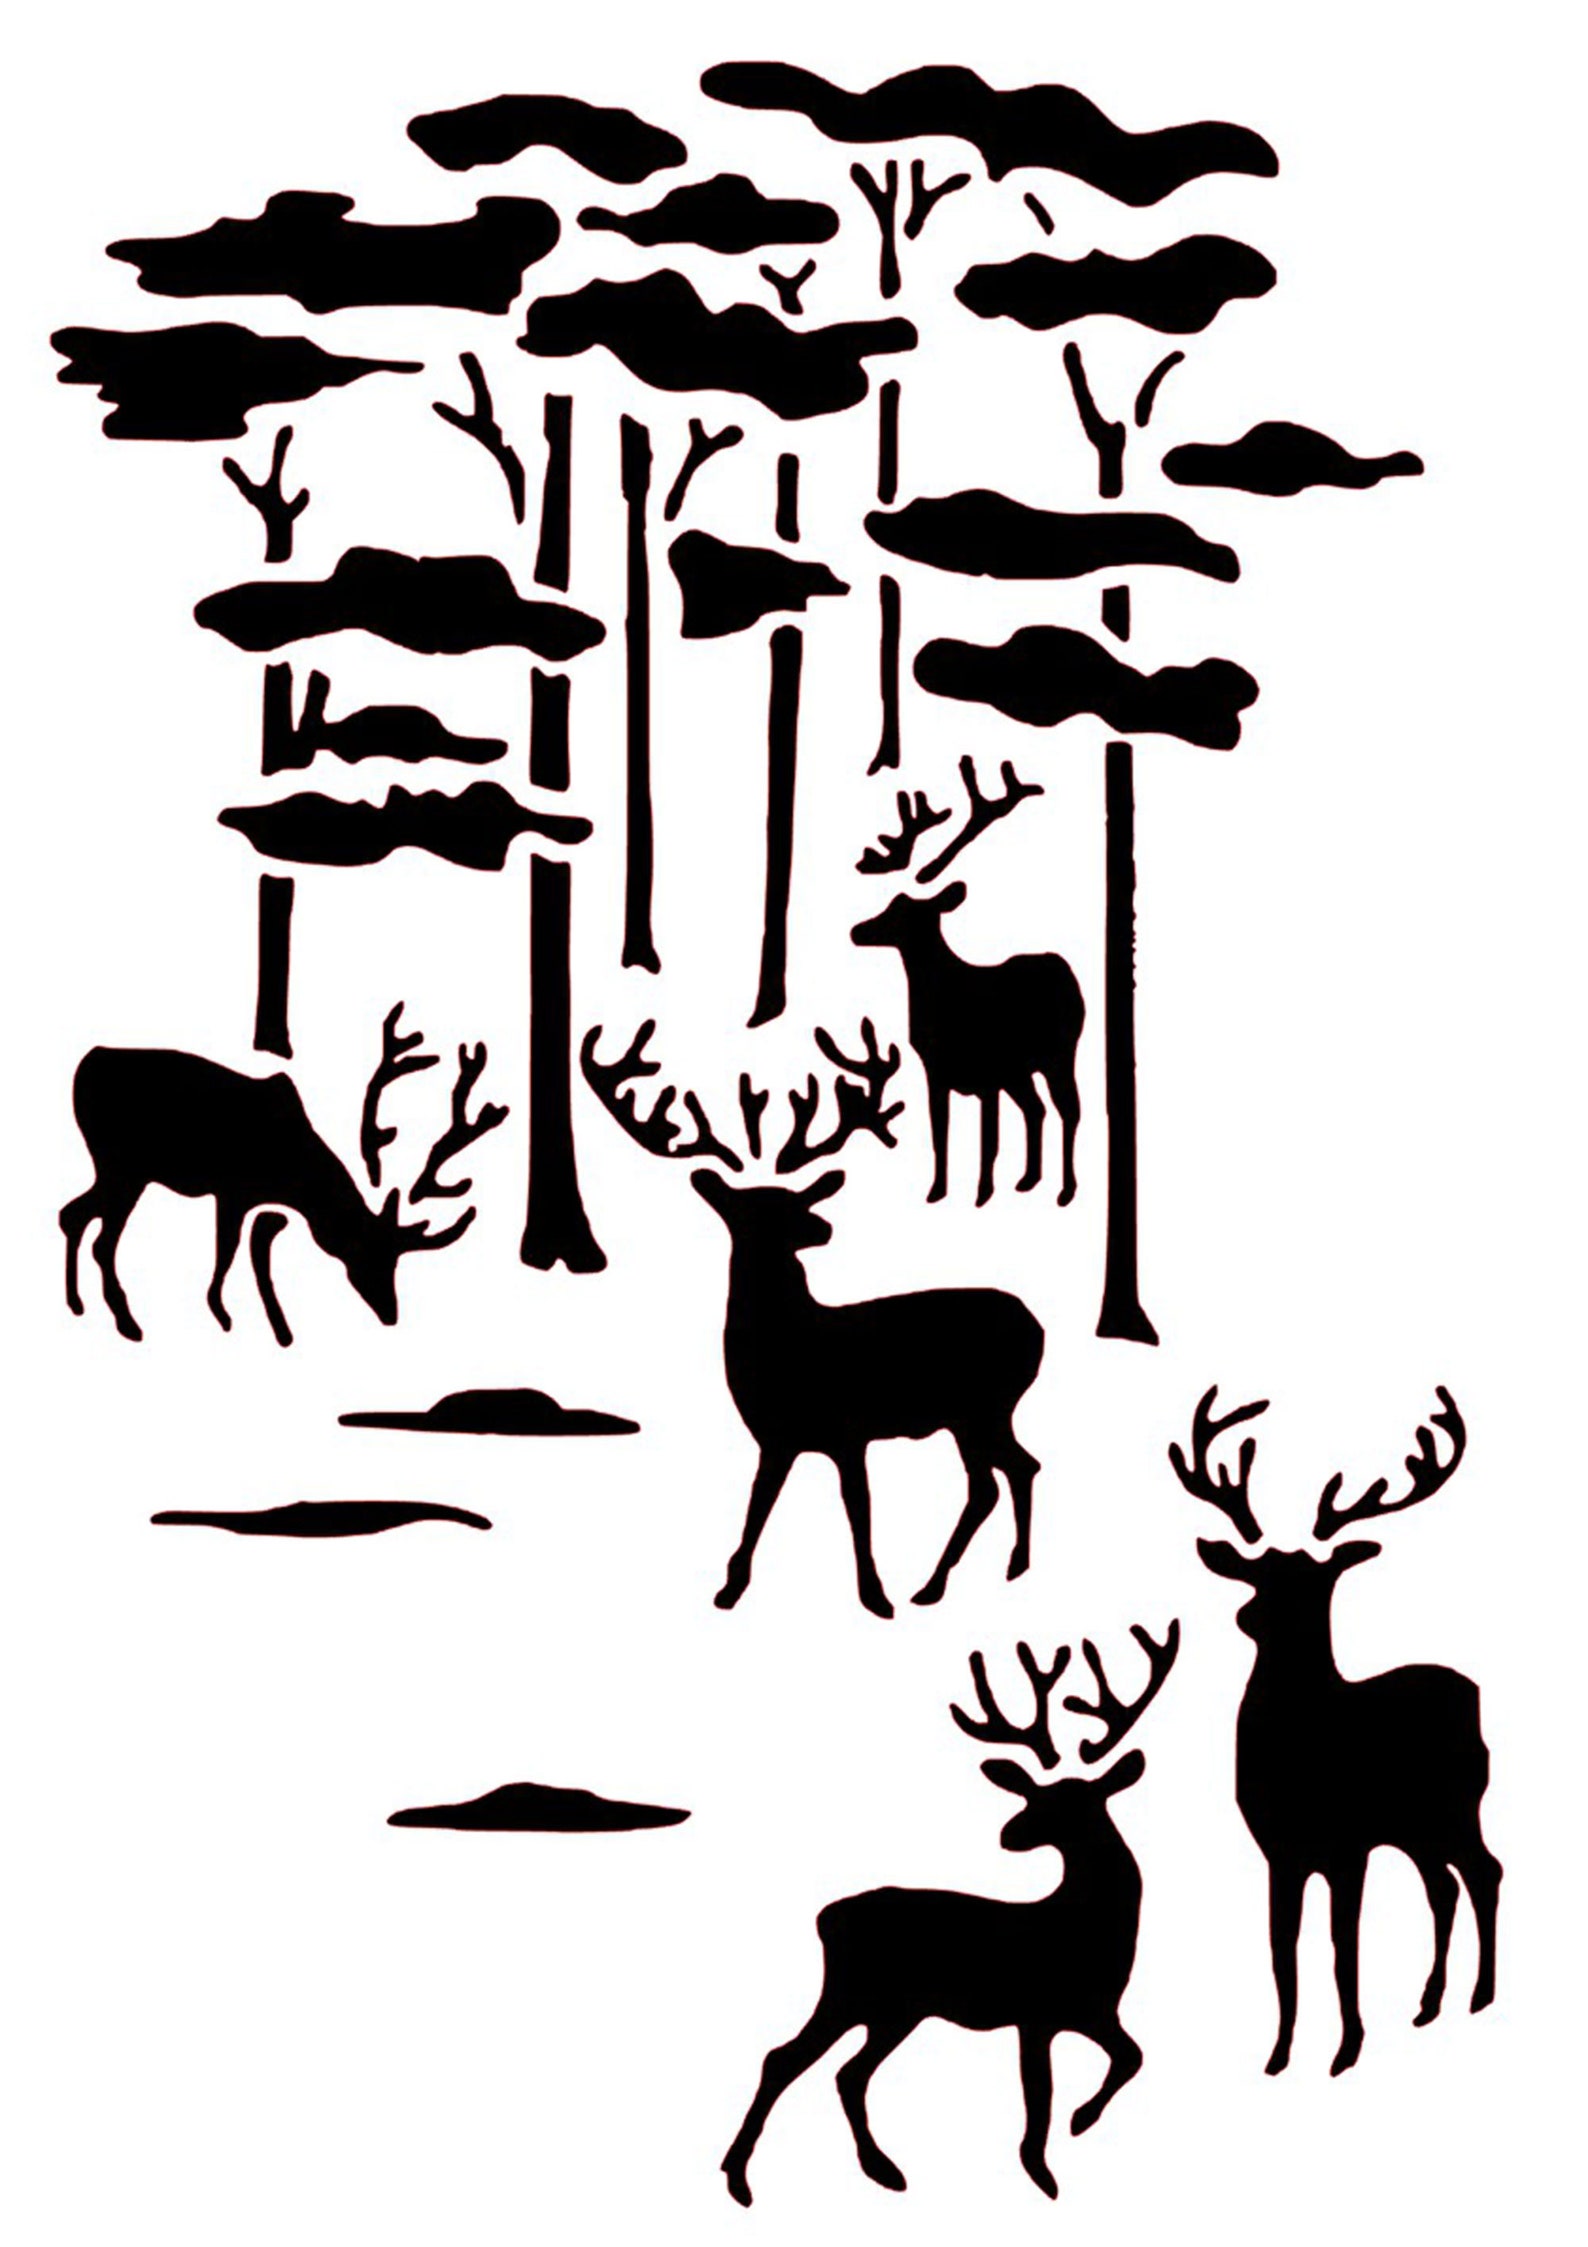 Reusable Stencil Deer Animal Forest Nature Sizes A5 A4 A3 Wall | Etsy